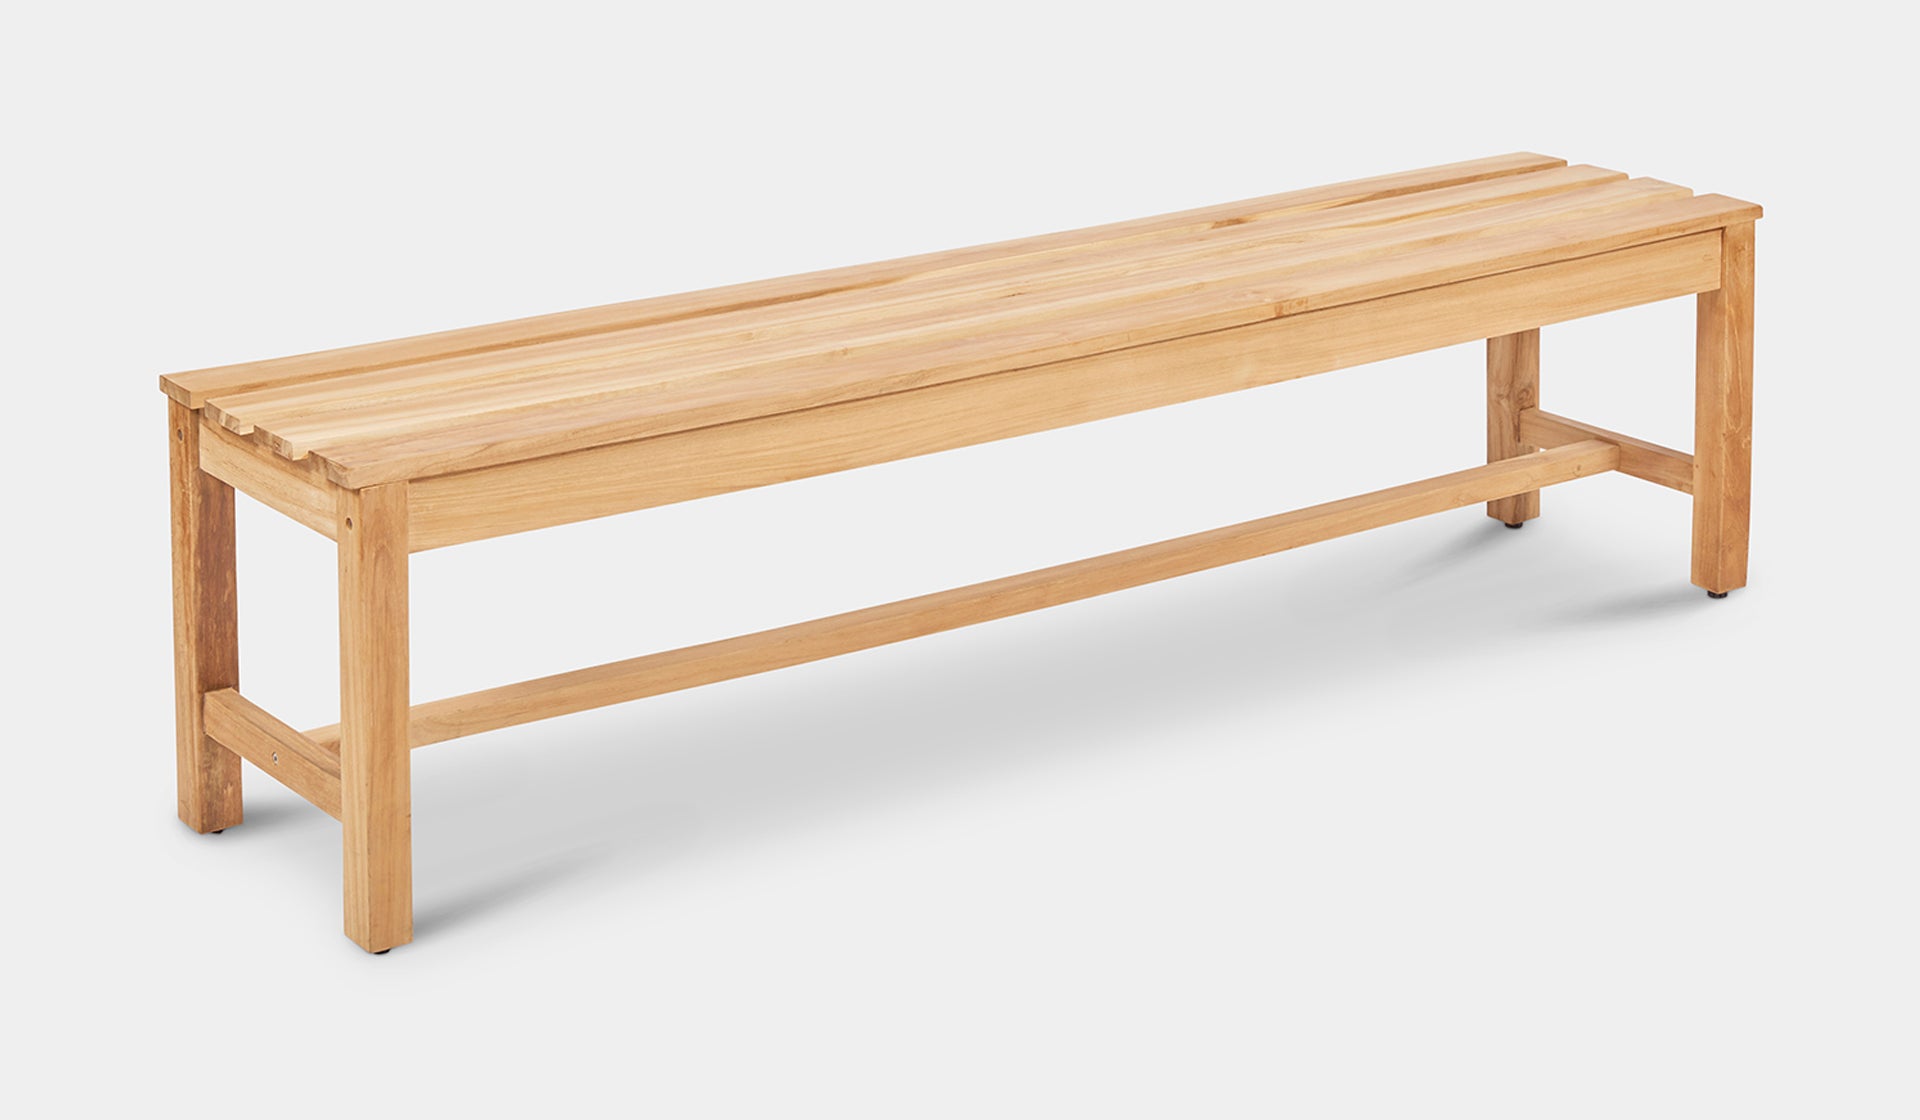 Teak-Lindon-table-with-bench-3